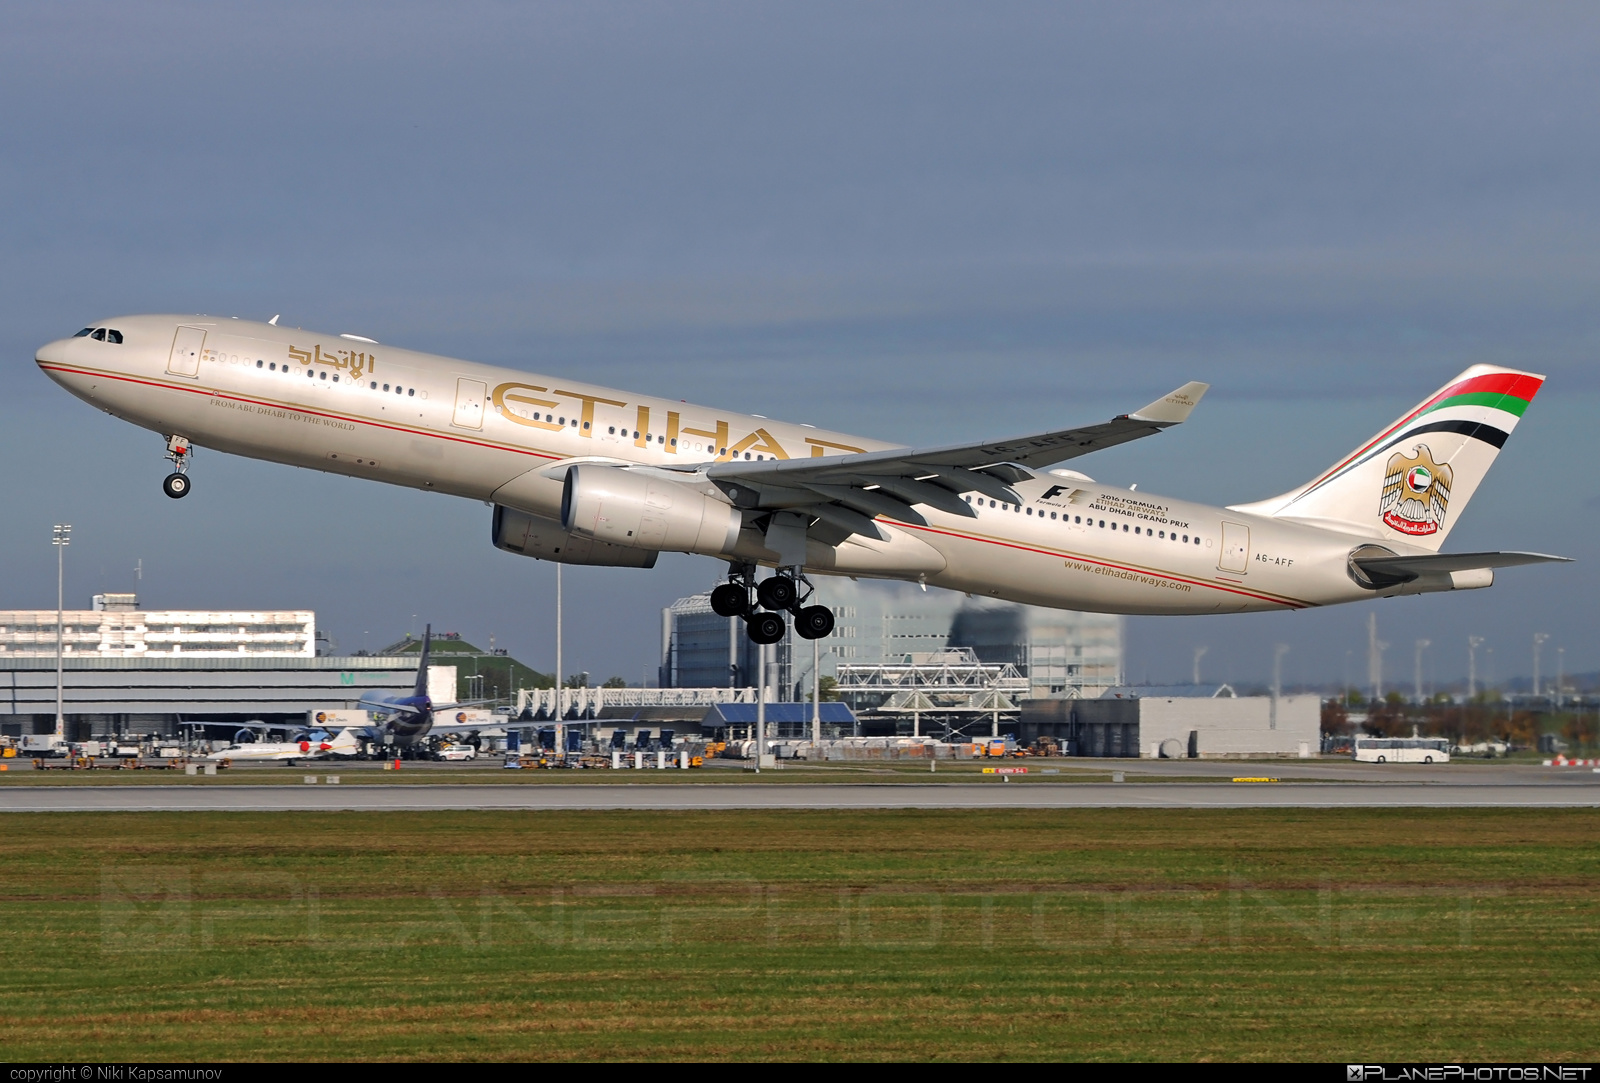 Airbus A330-343 - A6-AFF operated by Etihad Airways #a330 #a330family #airbus #airbus330 #etihad #etihadairways